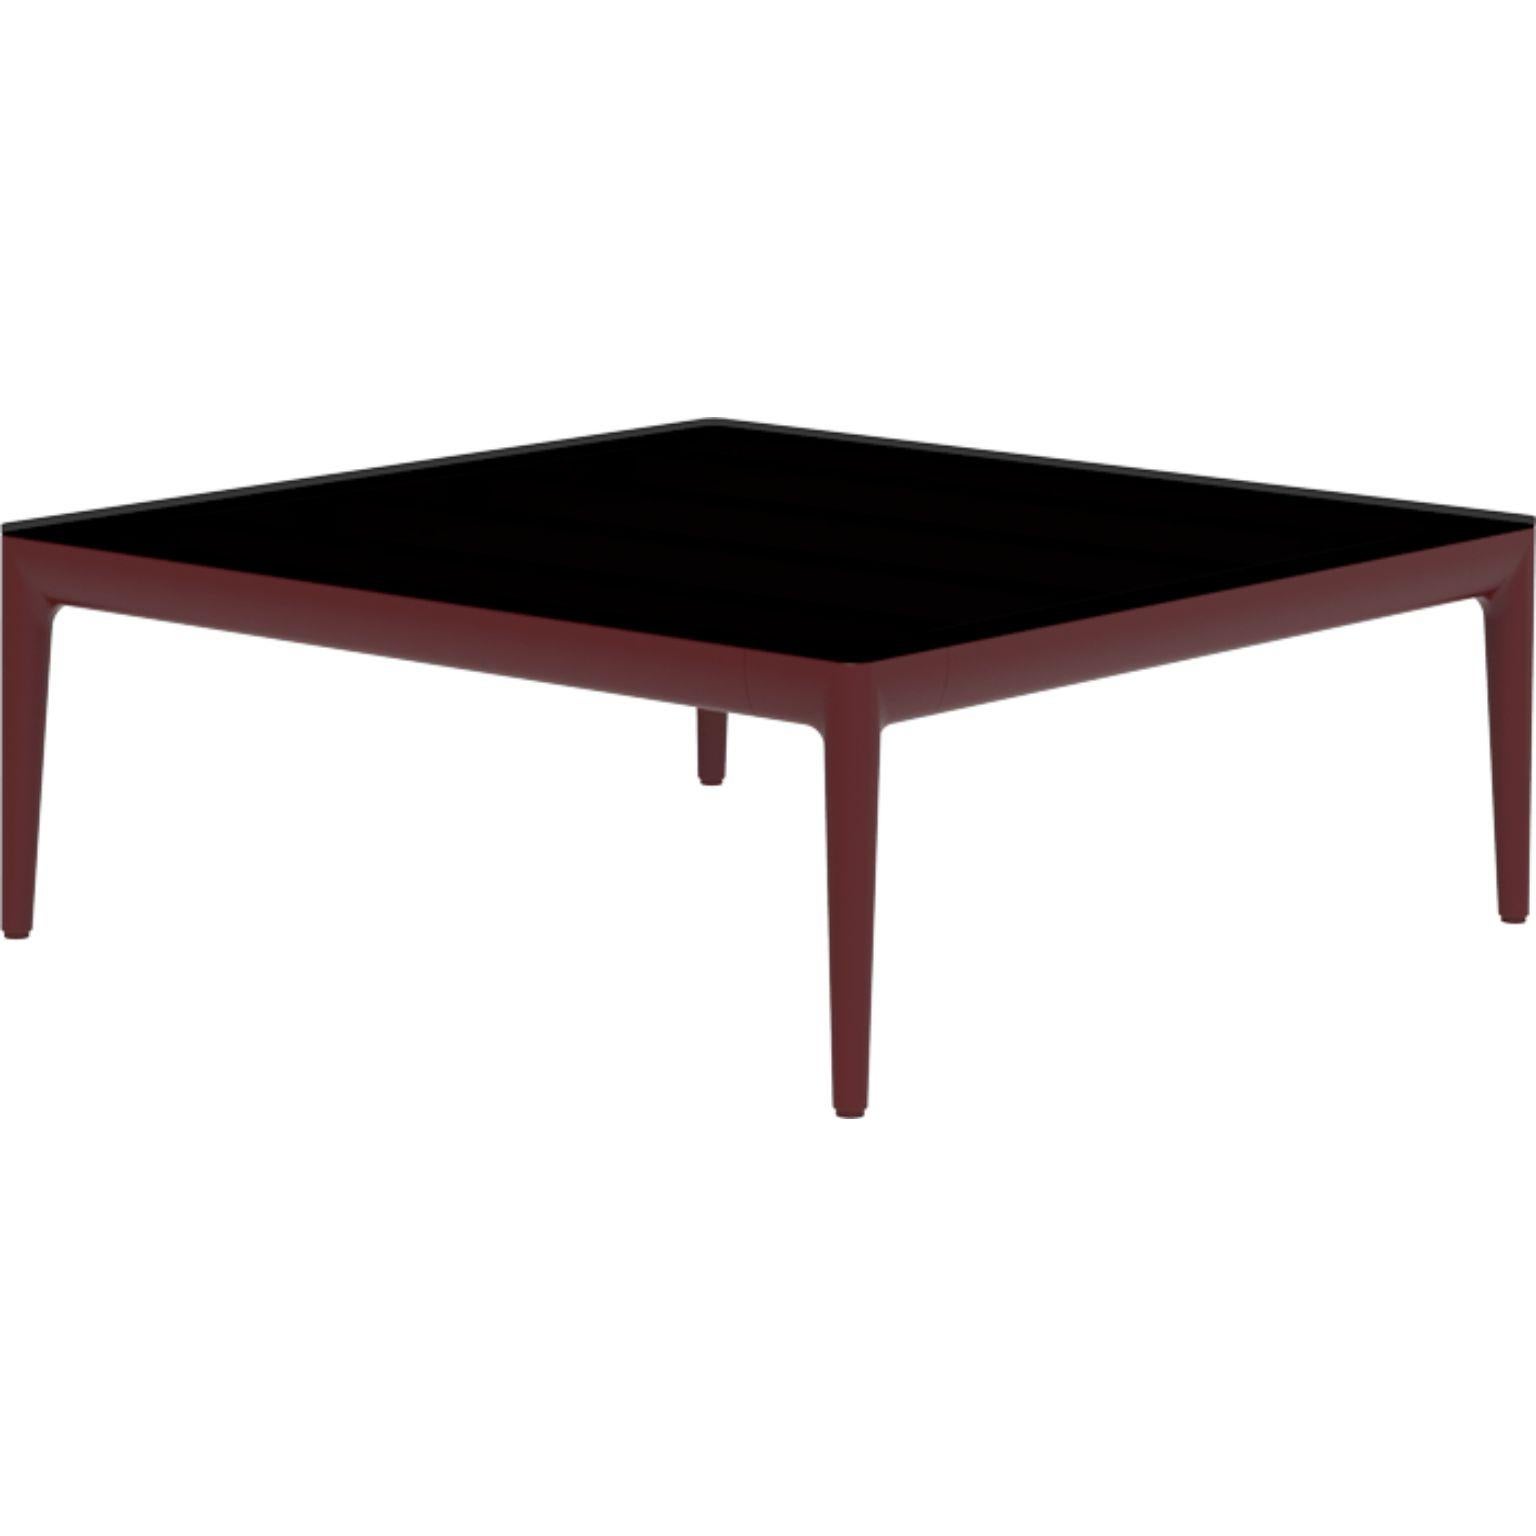 Ribbons Burgundy 76 coffee table by MOWEE
Dimensions: D 76 x W 76 x H 29 cm
Material: Aluminum and HPL top.
Weight: 12 kg.
Also available in different colors and finishes. (HPL Black Edge or Neolith top).

An unmistakable collection for its